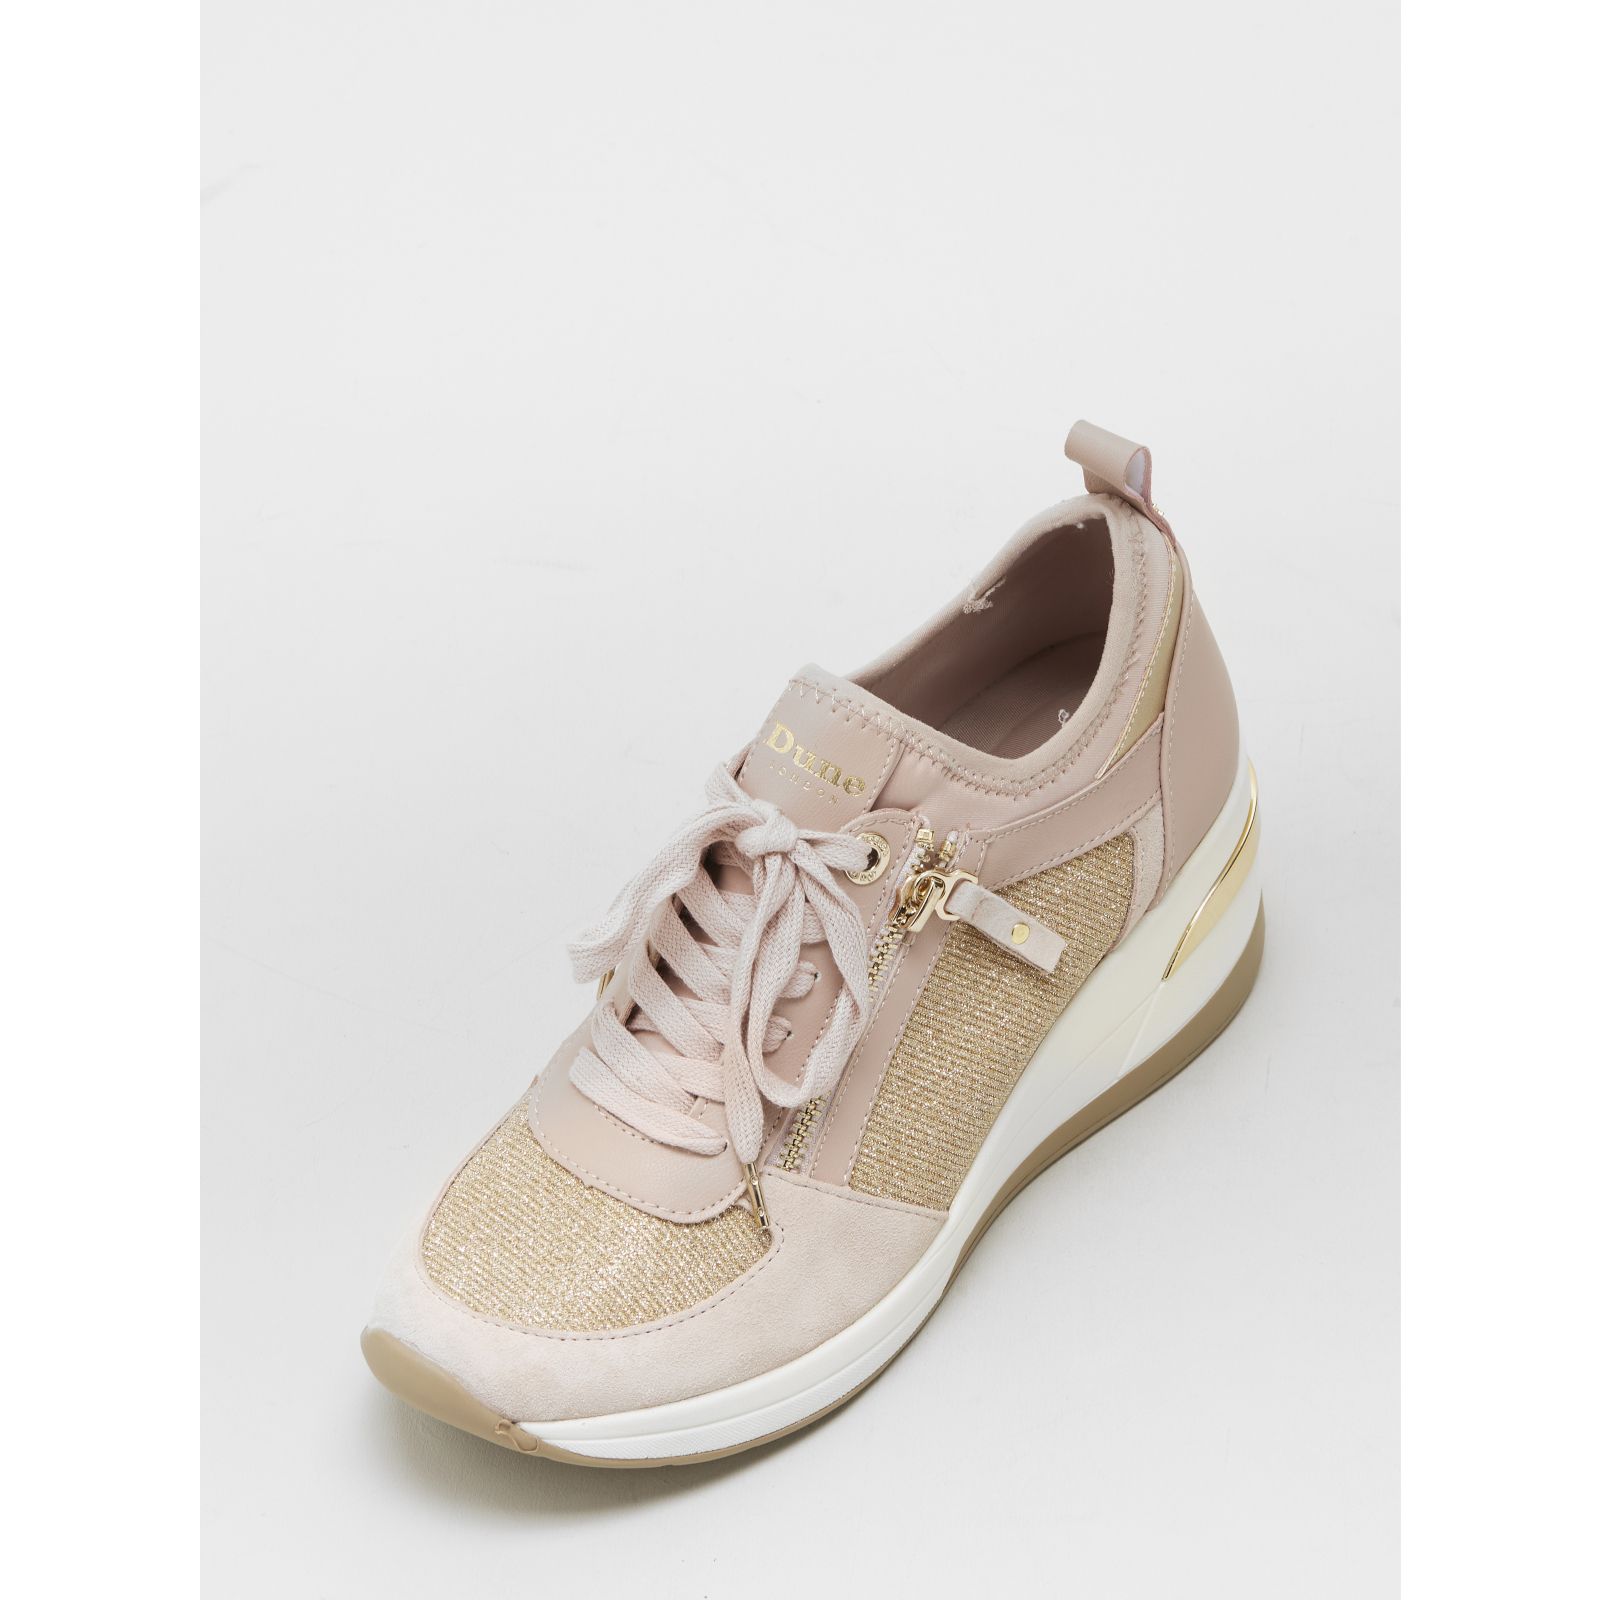 Dune London Eilin Lace Up Wedge Trainer - QVC UK